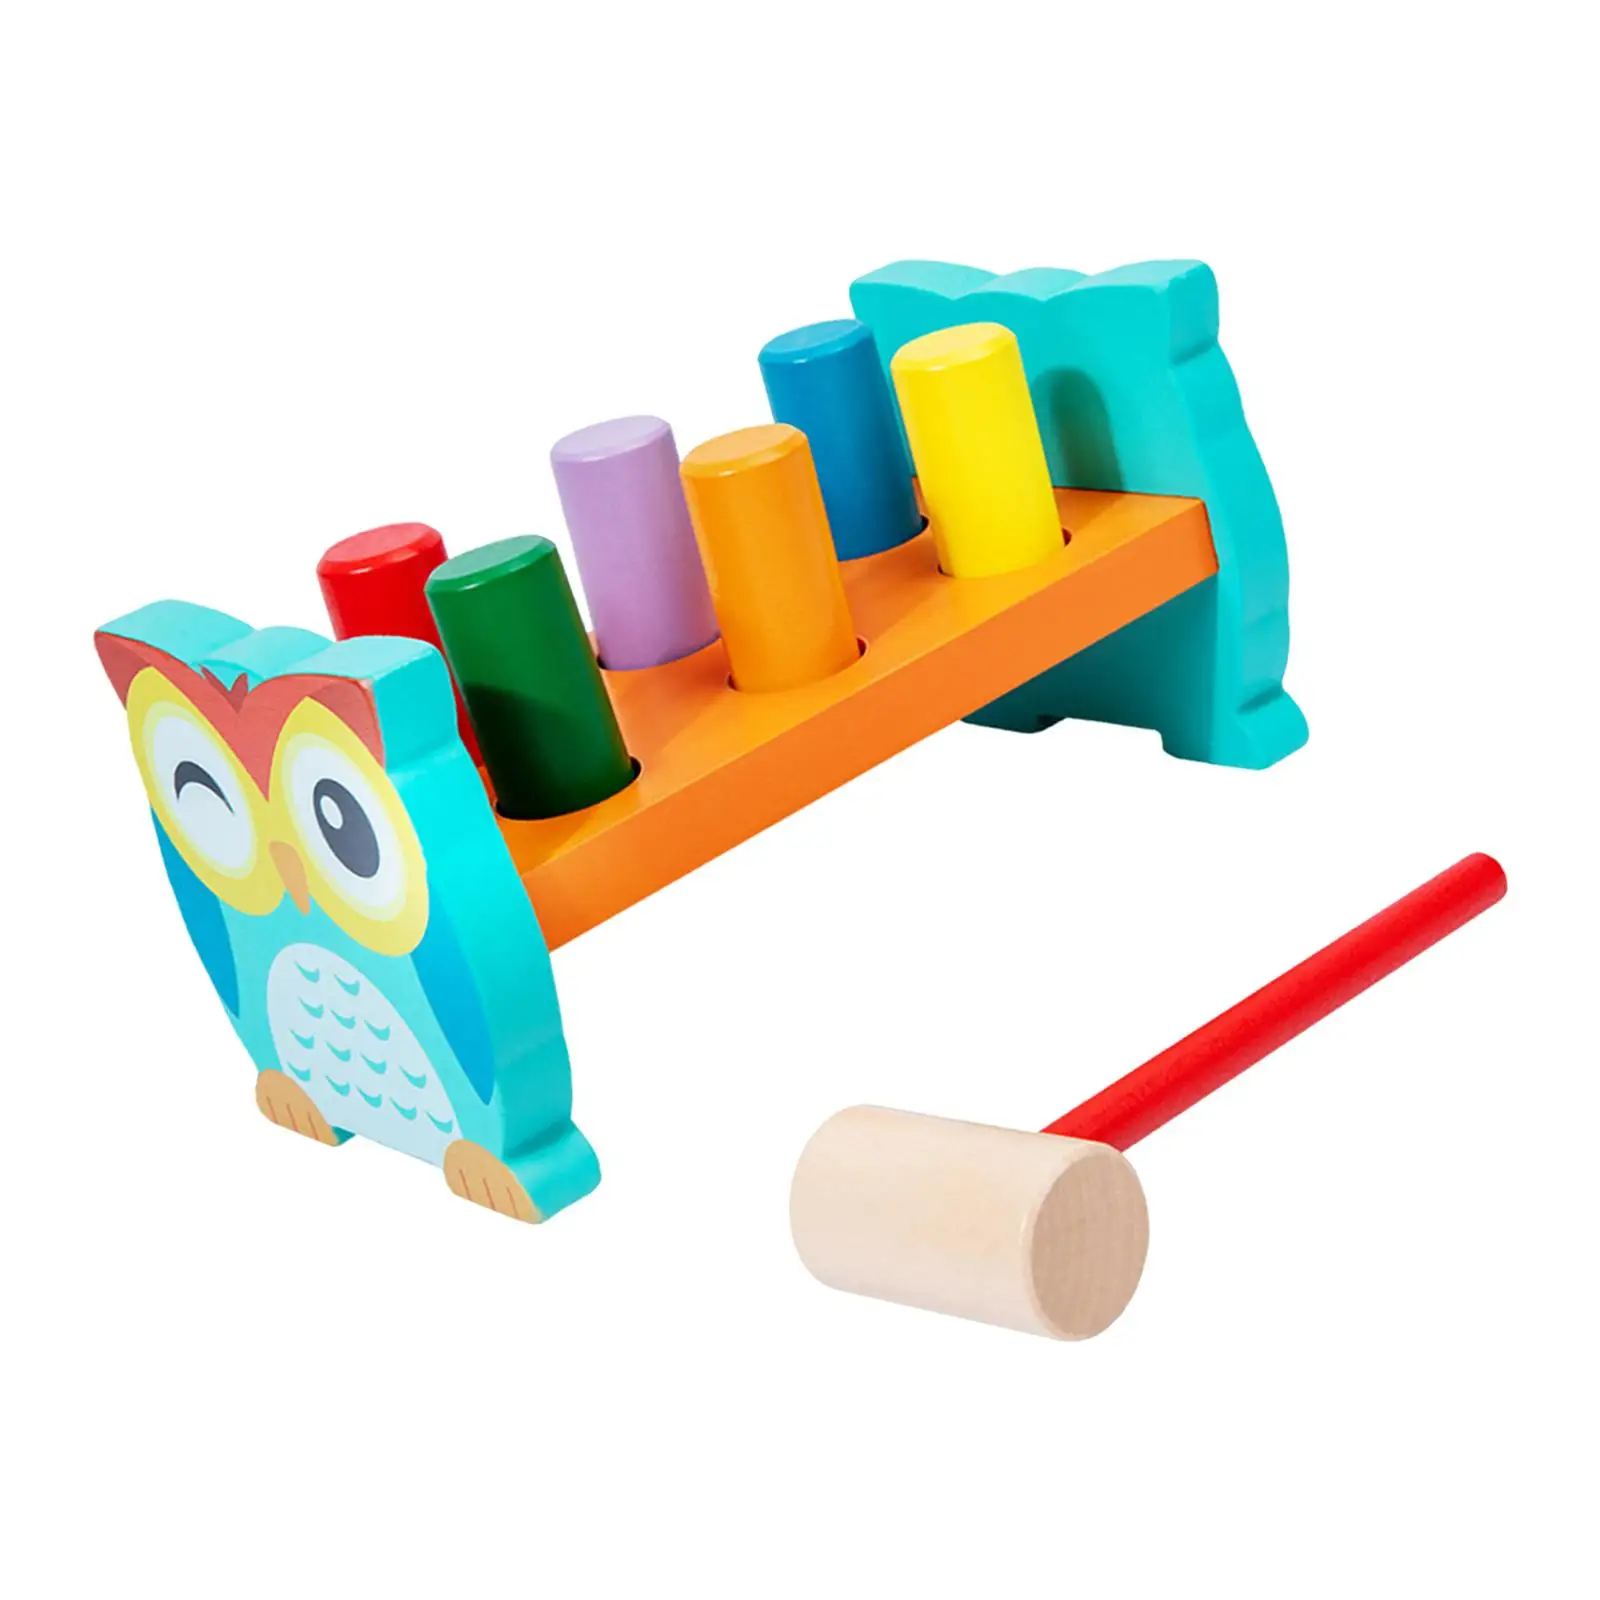 

Hammer Toys Colorful Wooden Pound A Peg Toys for Great Gift Kids, Toddlers